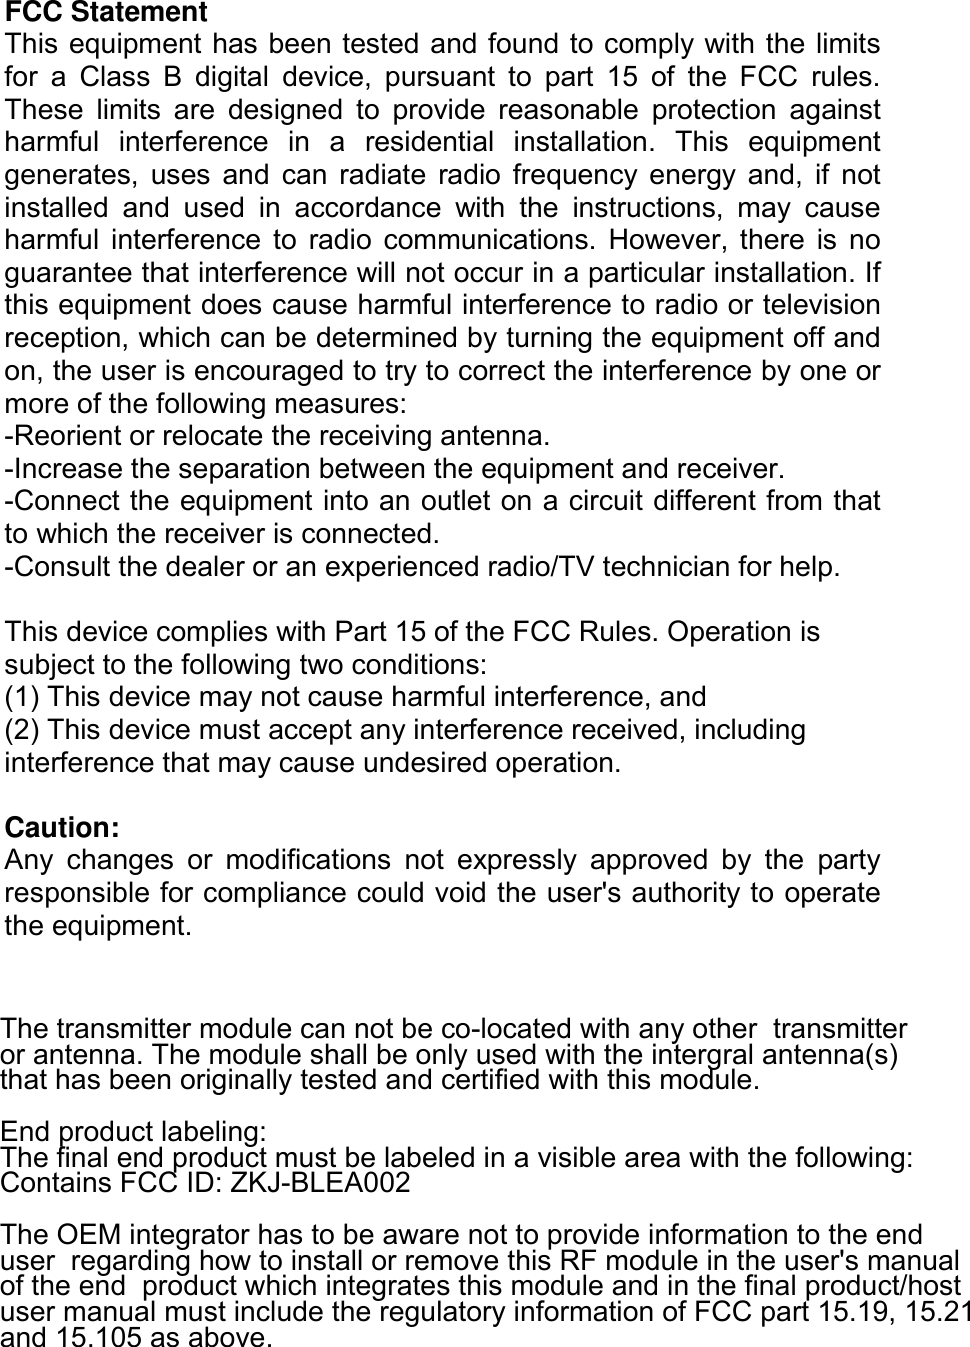  FCC Statement This equipment has been tested and found to comply with the limits for  a  Class  B  digital  device,  pursuant  to  part  15  of  the  FCC  rules. These  limits  are  designed  to  provide  reasonable  protection  against harmful  interference  in  a  residential  installation.  This  equipment generates,  uses  and  can  radiate  radio  frequency  energy  and,  if  not installed  and  used  in  accordance  with  the  instructions,  may  cause harmful  interference  to  radio  communications.  However, there  is  no guarantee that interference will not occur in a particular installation. If this equipment does cause harmful interference to radio or television reception, which can be determined by turning the equipment off and on, the user is encouraged to try to correct the interference by one or more of the following measures: -Reorient or relocate the receiving antenna. -Increase the separation between the equipment and receiver. -Connect the equipment into an outlet on a circuit different from that to which the receiver is connected. -Consult the dealer or an experienced radio/TV technician for help.  This device complies with Part 15 of the FCC Rules. Operation is subject to the following two conditions: (1) This device may not cause harmful interference, and (2) This device must accept any interference received, including interference that may cause undesired operation.  Caution: Any  changes  or  modifications  not  expressly  approved  by  the  party responsible for compliance could void the user&apos;s authority to operate the equipment. The transmitter module can not be co-located with any other  transmitter or antenna. The module shall be only used with the intergral antenna(s)  that has been originally tested and certified with this module.  End product labeling:  The final end product must be labeled in a visible area with the following:  Contains FCC ID: ZKJ-BLEA002 The OEM integrator has to be aware not to provide information to the end user  regarding how to install or remove this RF module in the user&apos;s manual of the end  product which integrates this module and in the final product/hostuser manual must include the regulatory information of FCC part 15.19, 15.21and 15.105 as above.                 